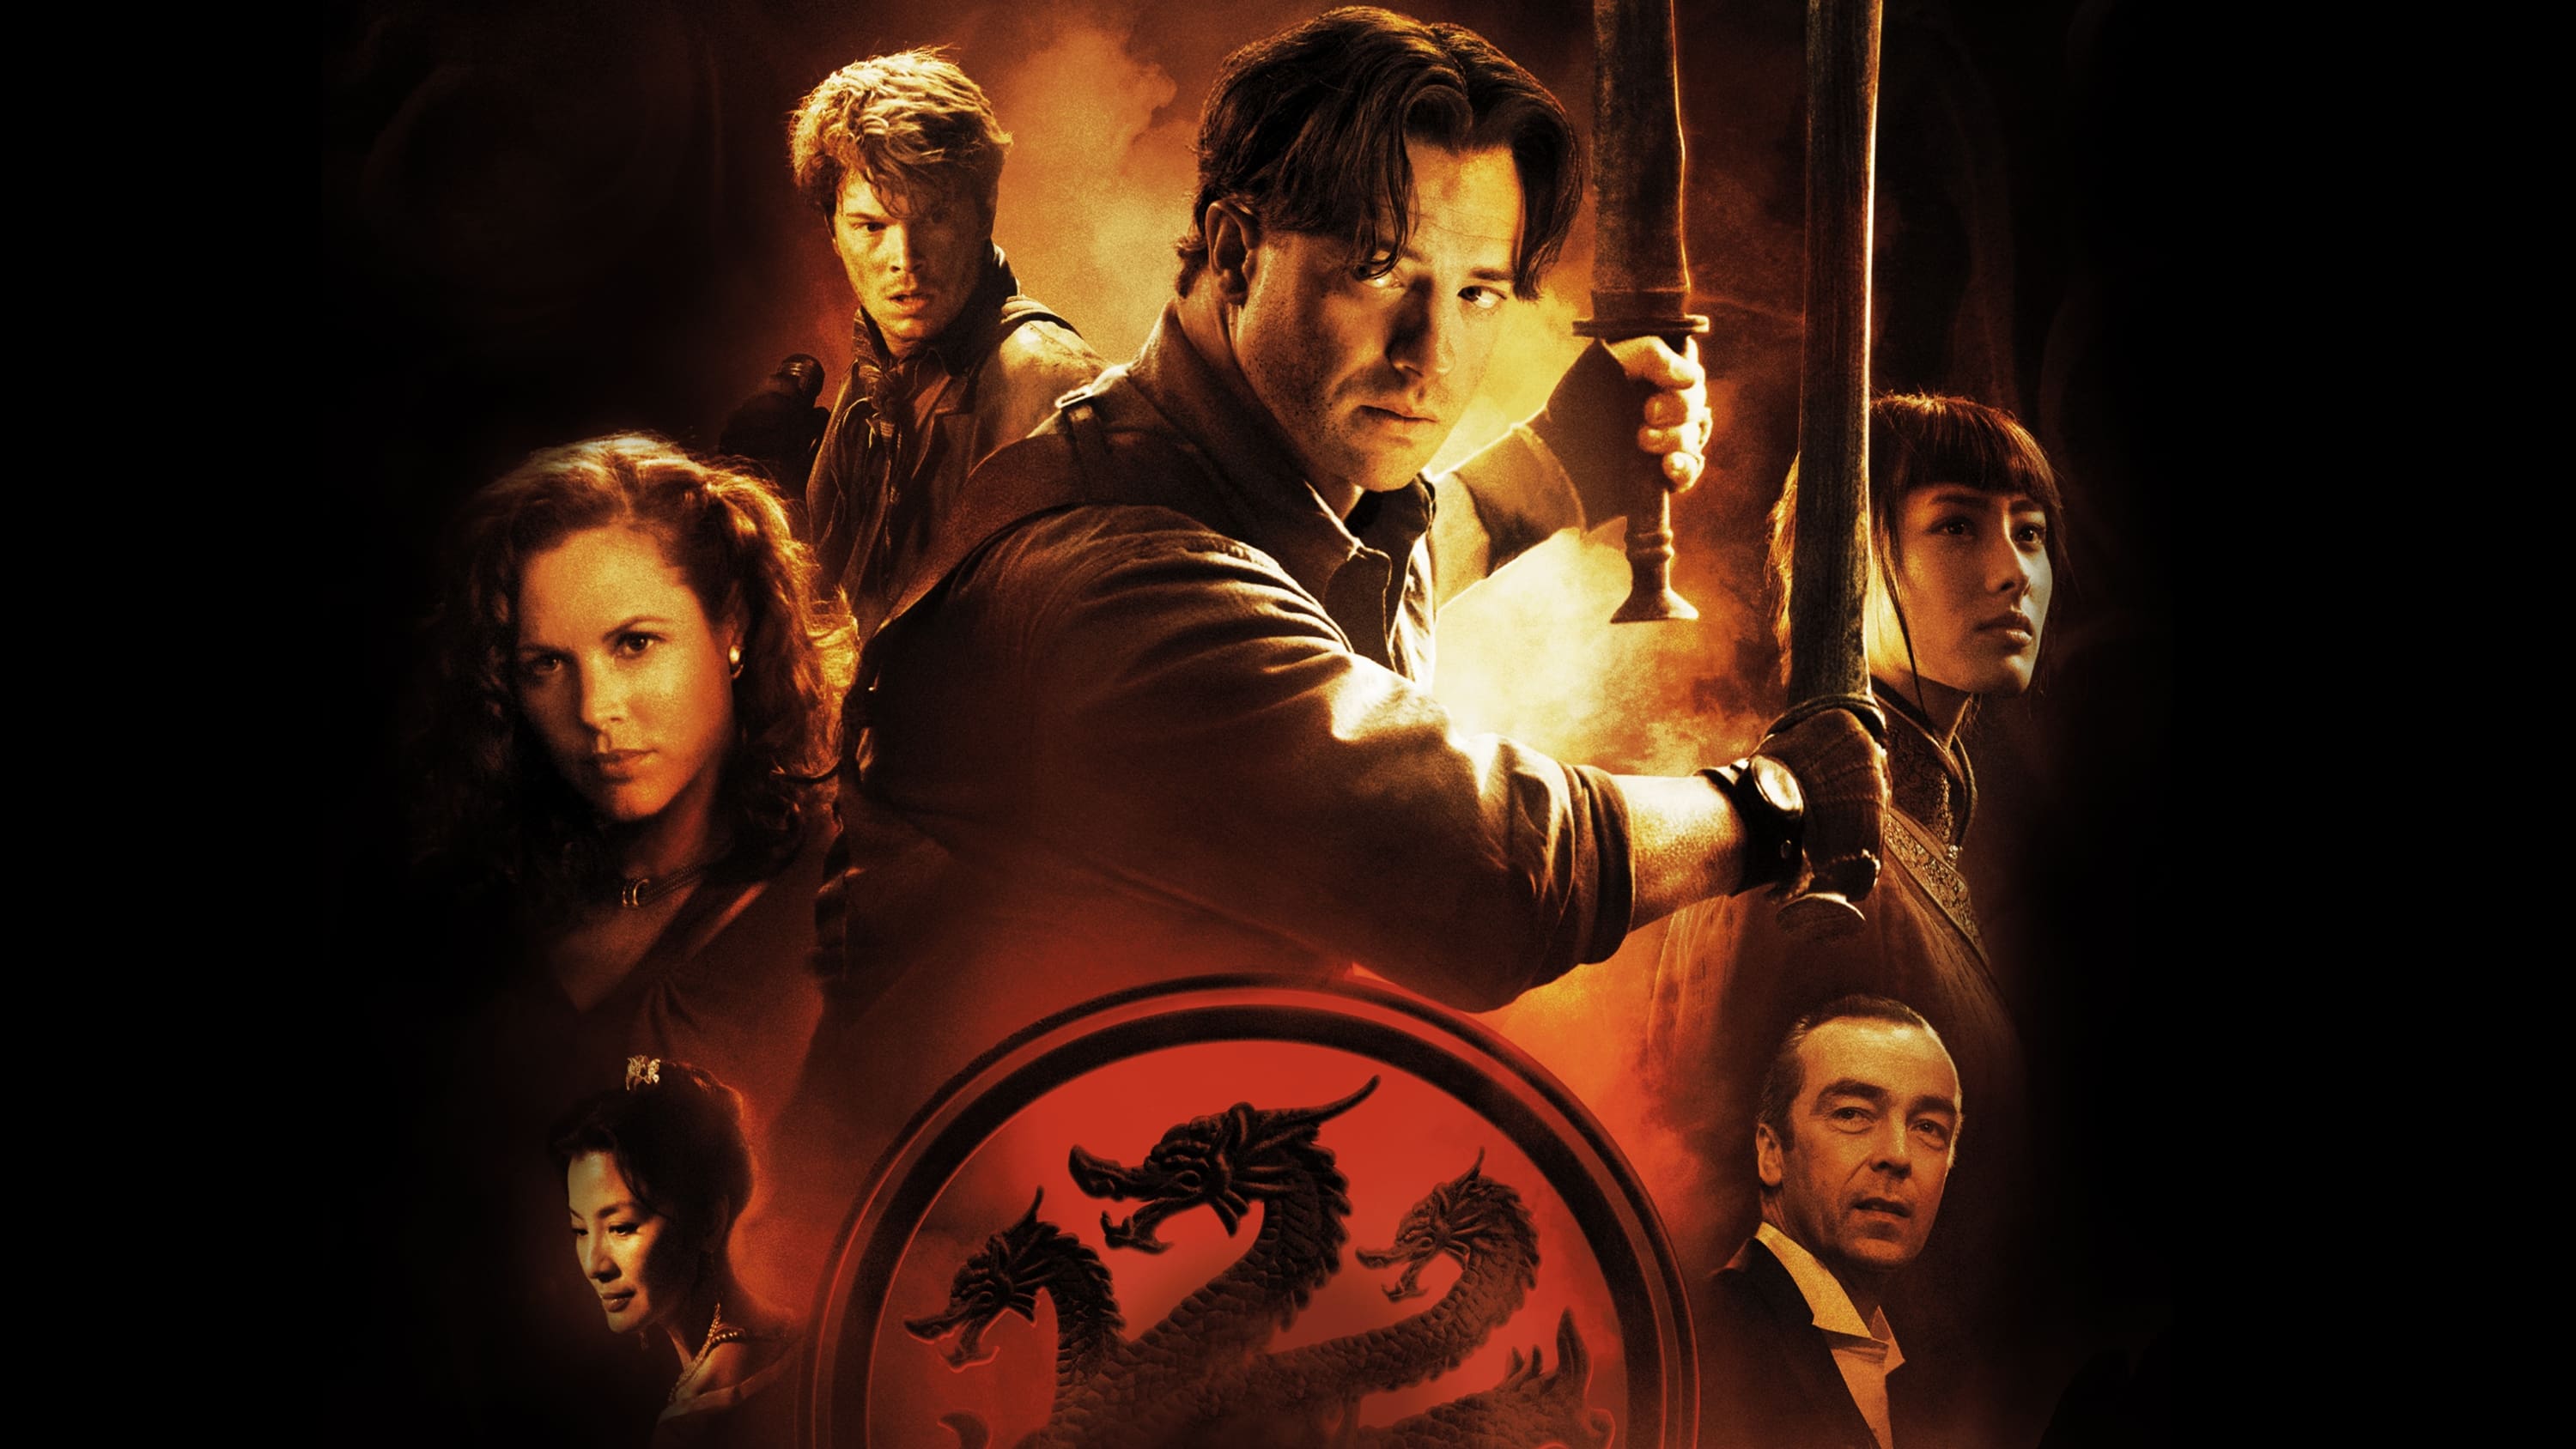 The Mummy: Tomb of the Dragon Emperor 2008 123movies